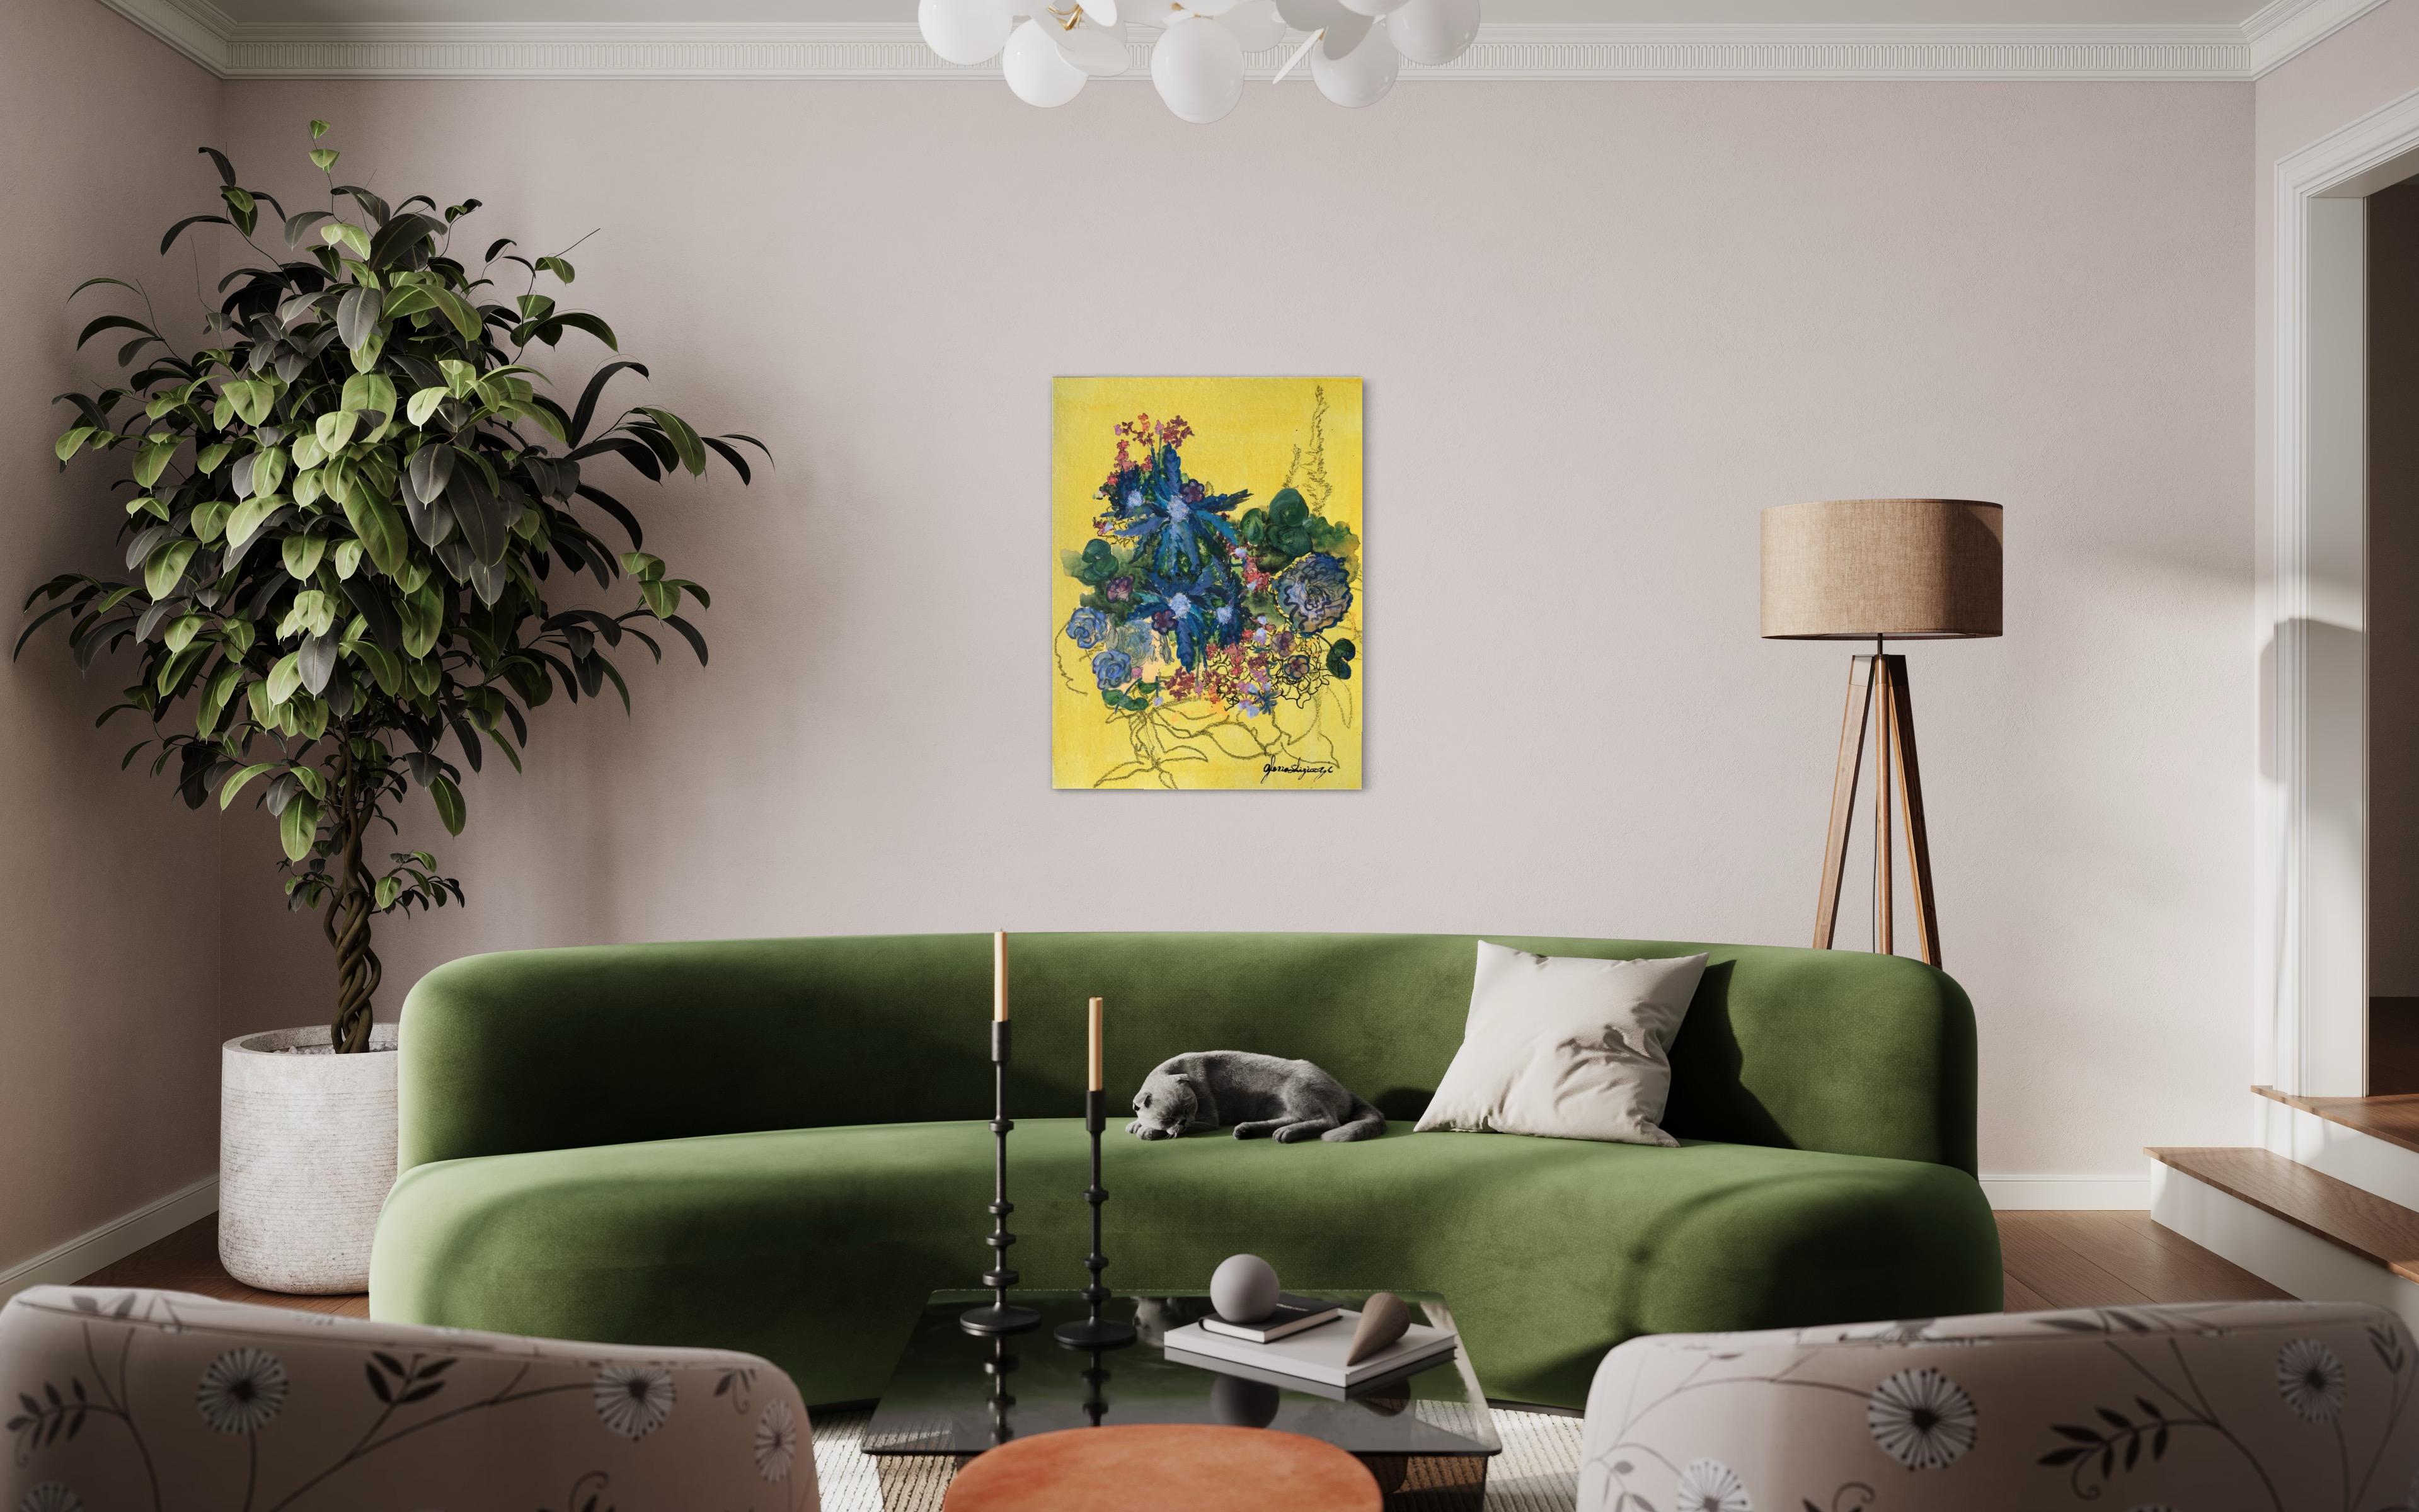 A Rare chance to get this large Artist's Proof #6 of the 6 at the best price possible and it's the final one available! the colours of the painting truly brings impact to your space! wowing the visitors and delight your daily life.
A limited Proof